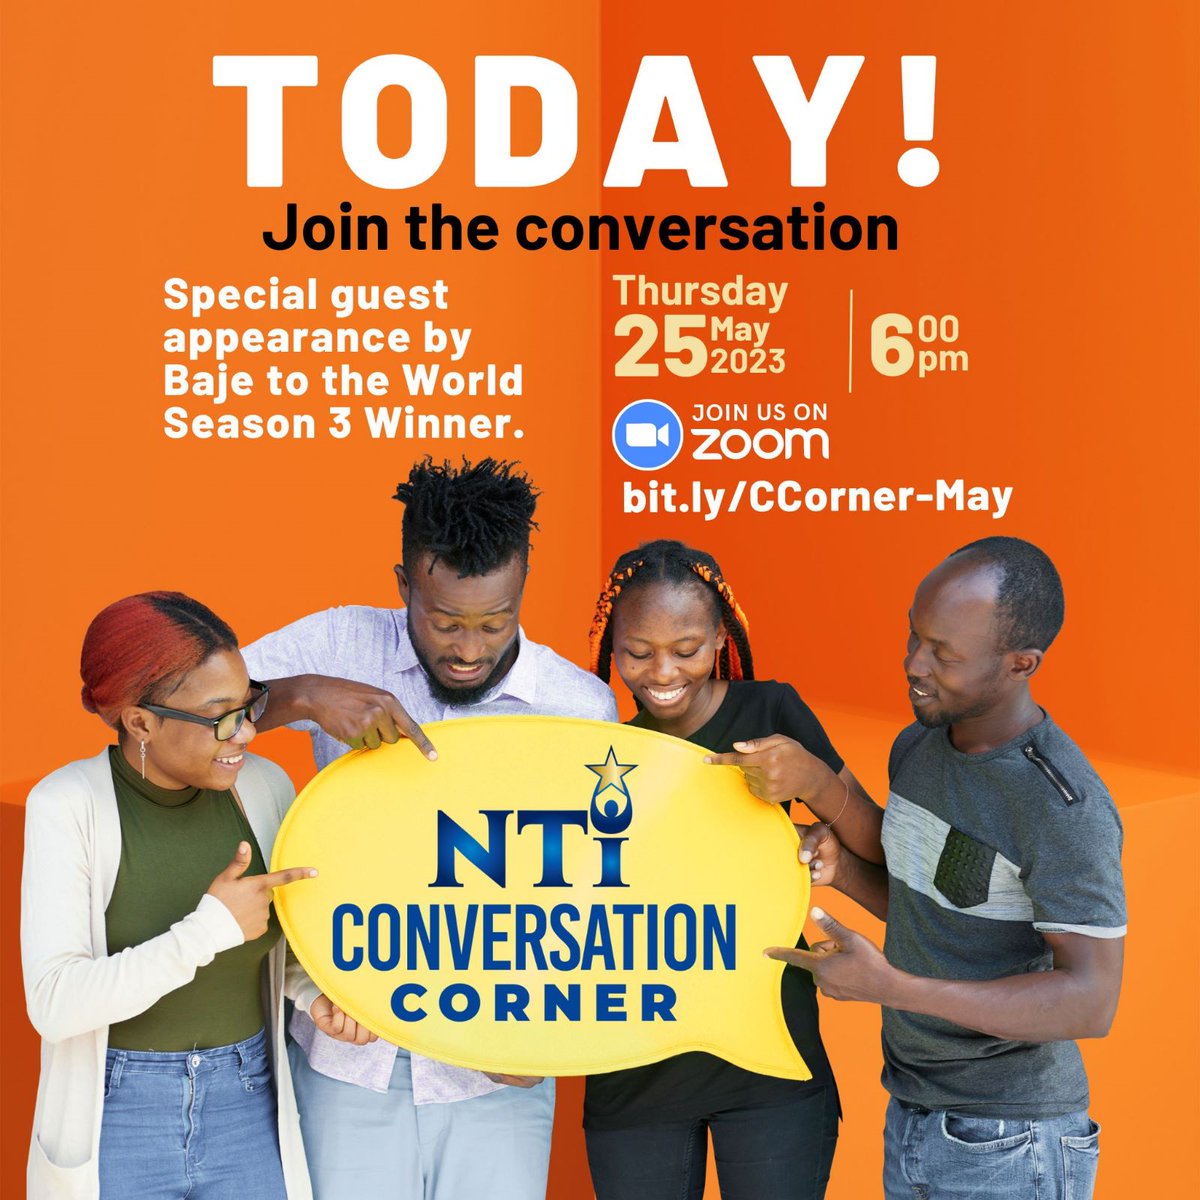 Today! We have a fantastic Conversation Corner lined up for you with the Baje to the World season 3 winner, Kyrique Alleyne! Join us via the ZOOM link at 6:00pm! #NTI #ConversationCorner #BajeToTheWorld